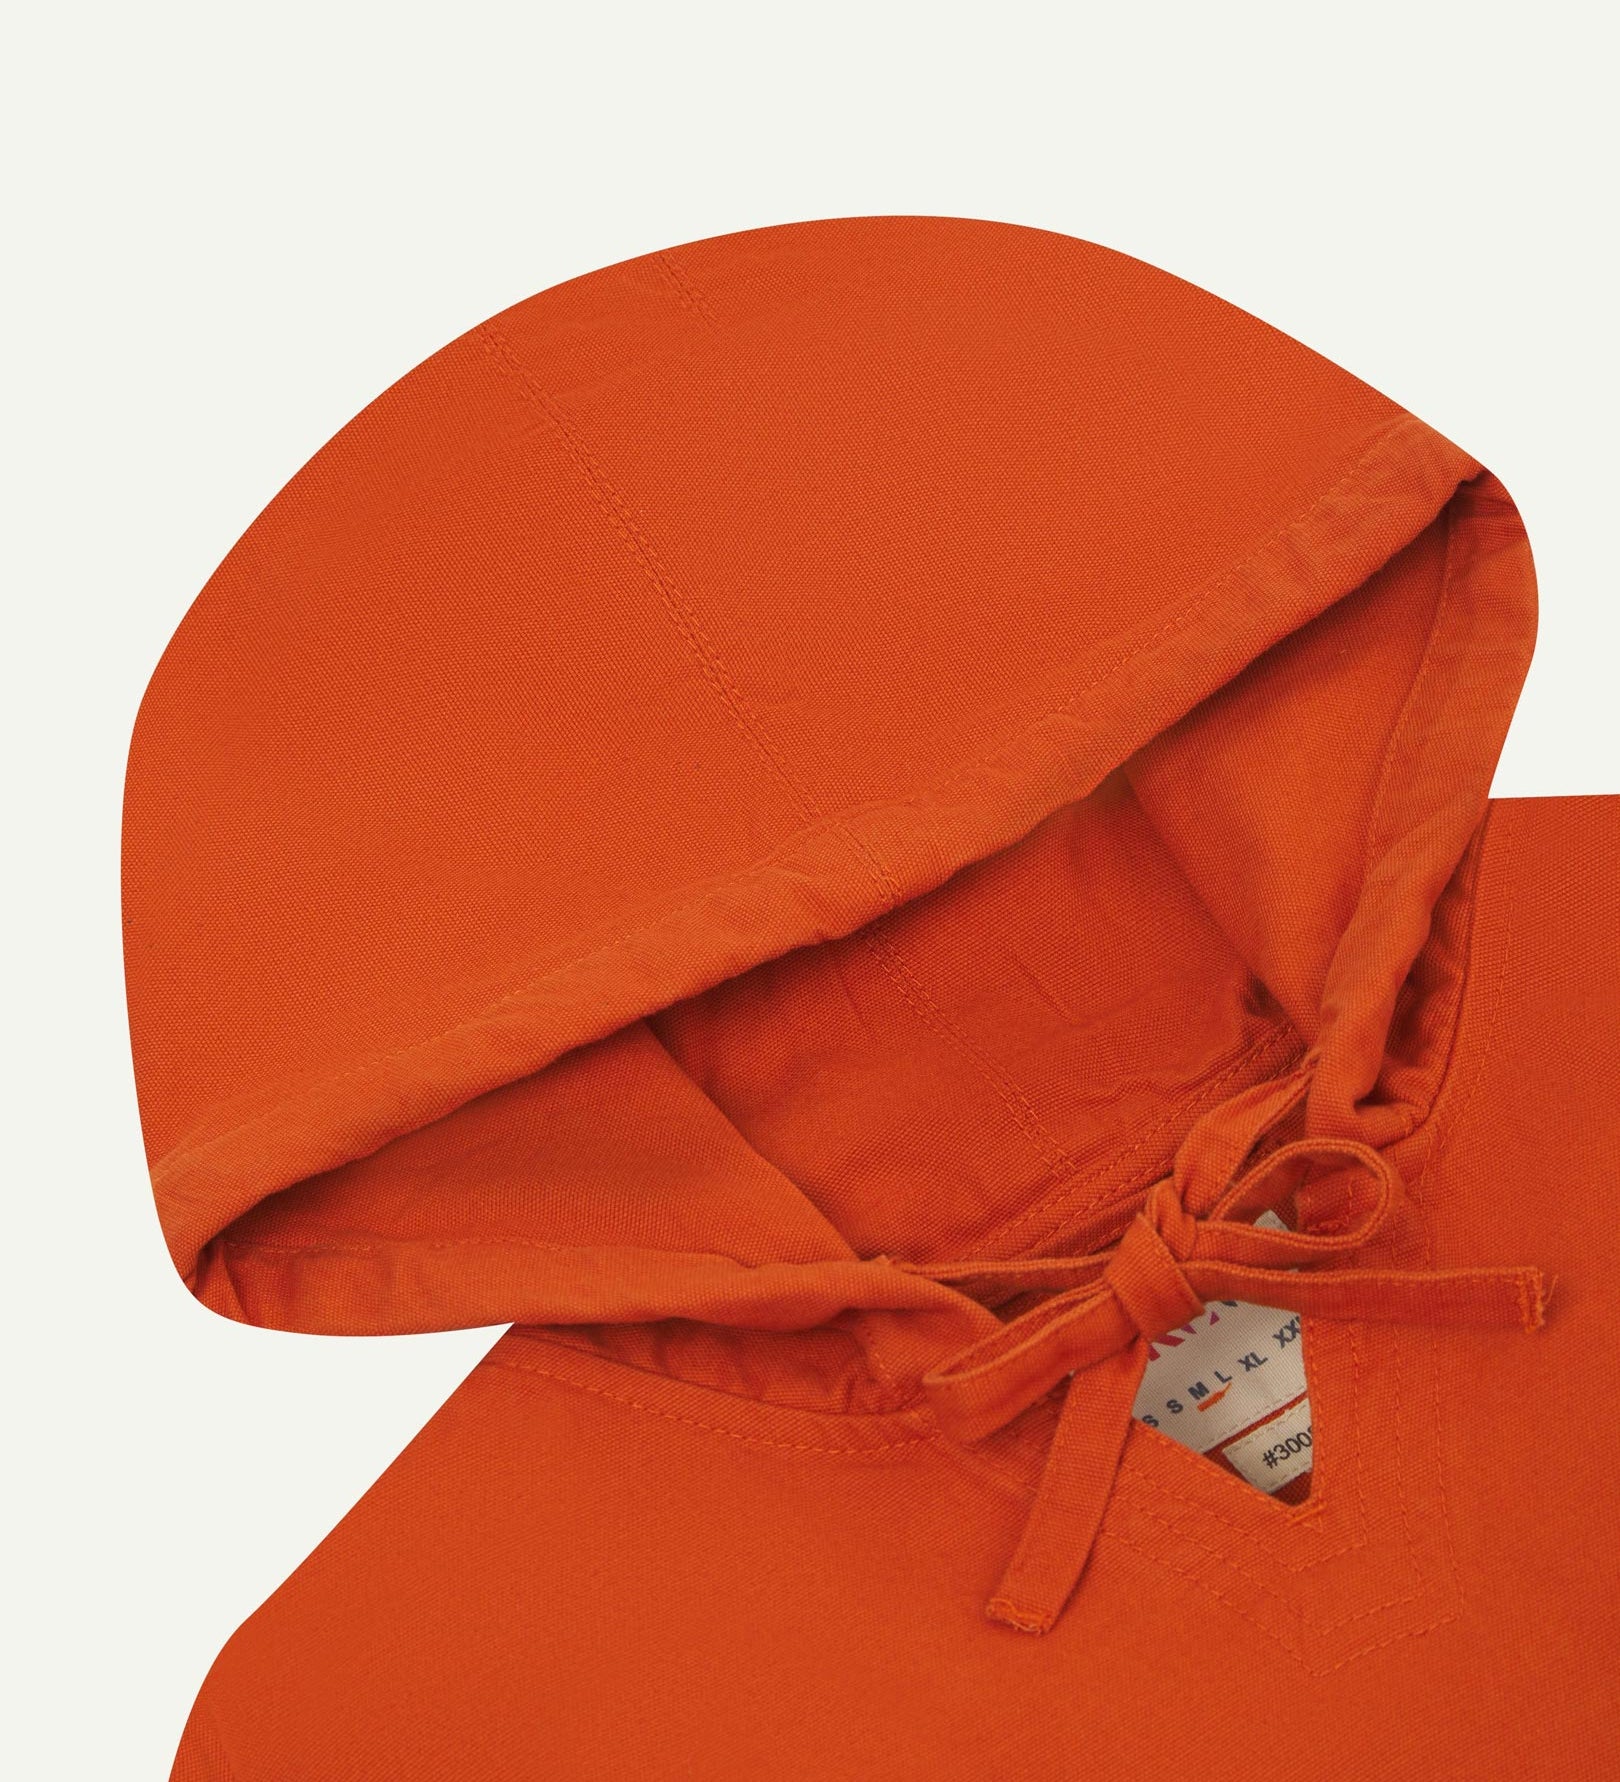 Closer look at the hood of the Uskees organic cotton smock in gold-orange showing hood, hood drawstring and quadruply stitched neck area.